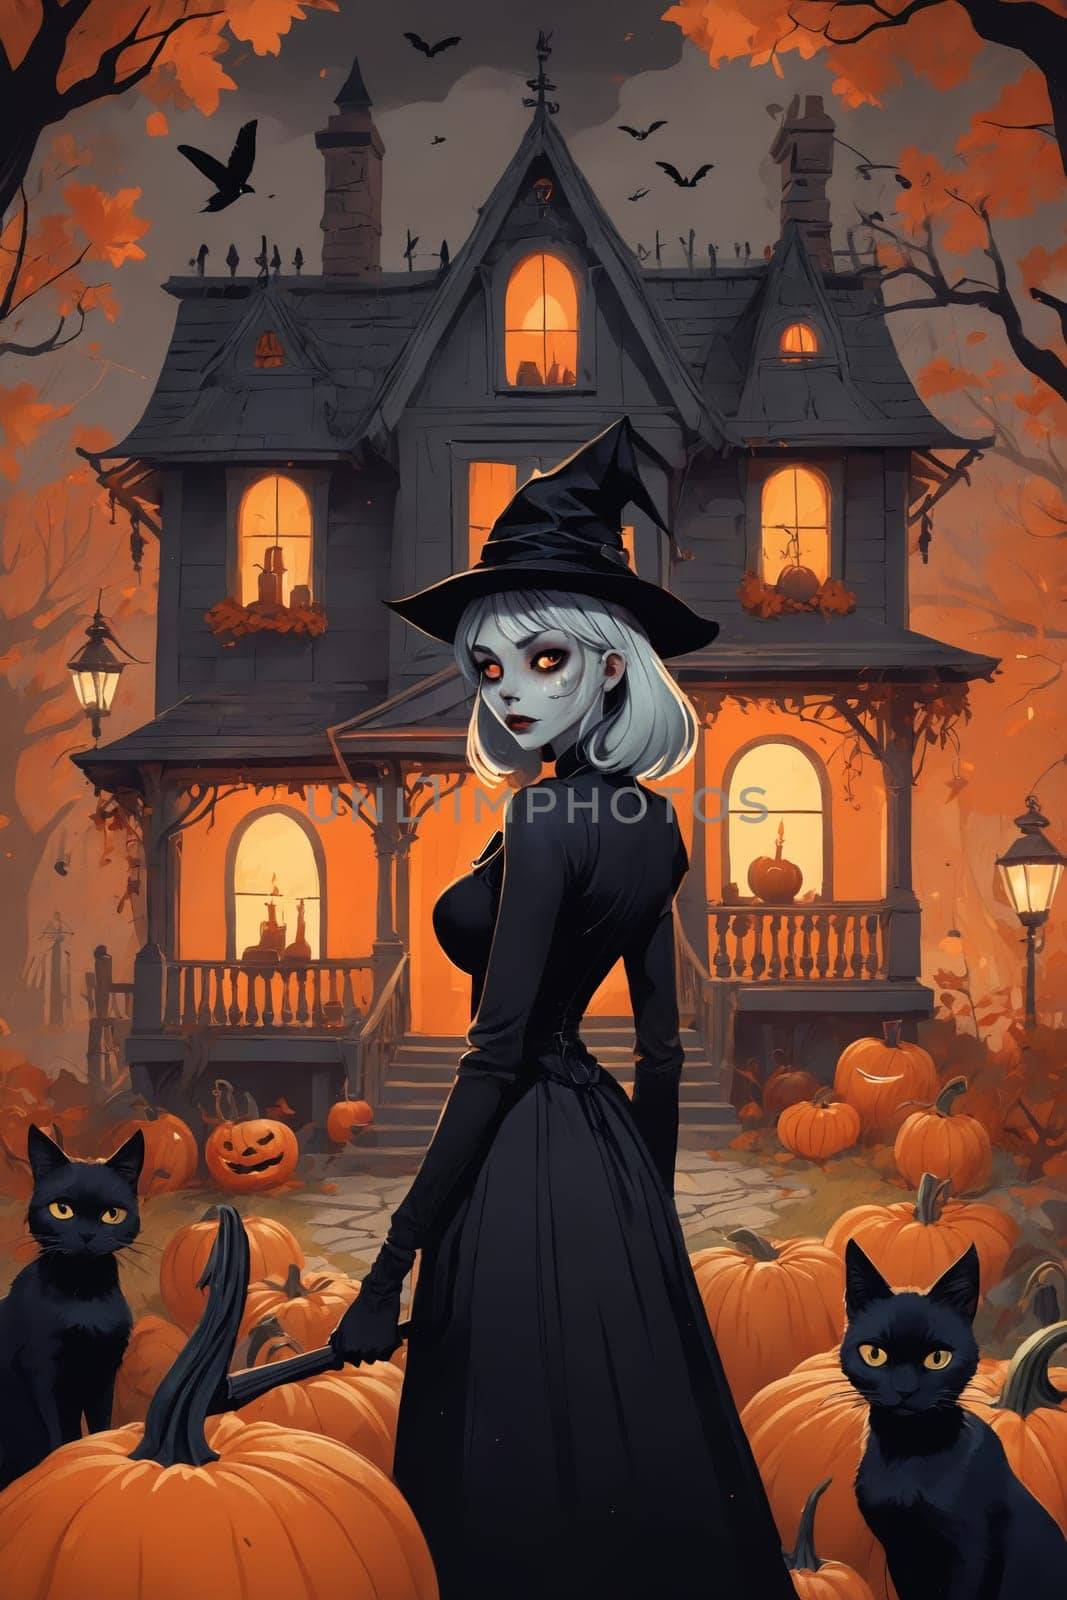 Bewitching Hour: Classic Halloween Scene with Carved Pumpkins and Haunted House by Andre1ns